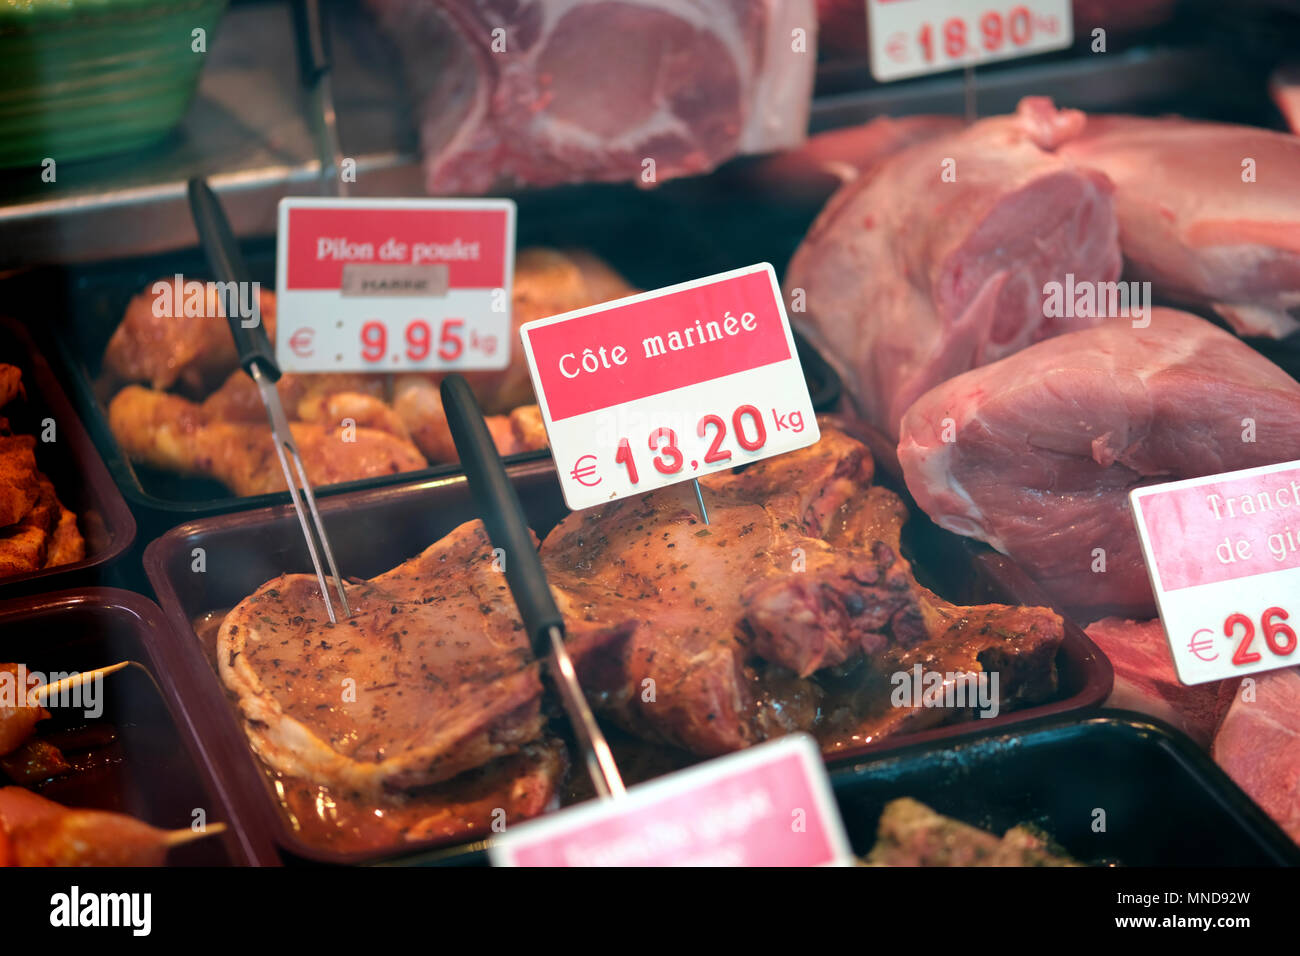 Meats and sausages inside a butchery in Liege, Belgium Stock Photo